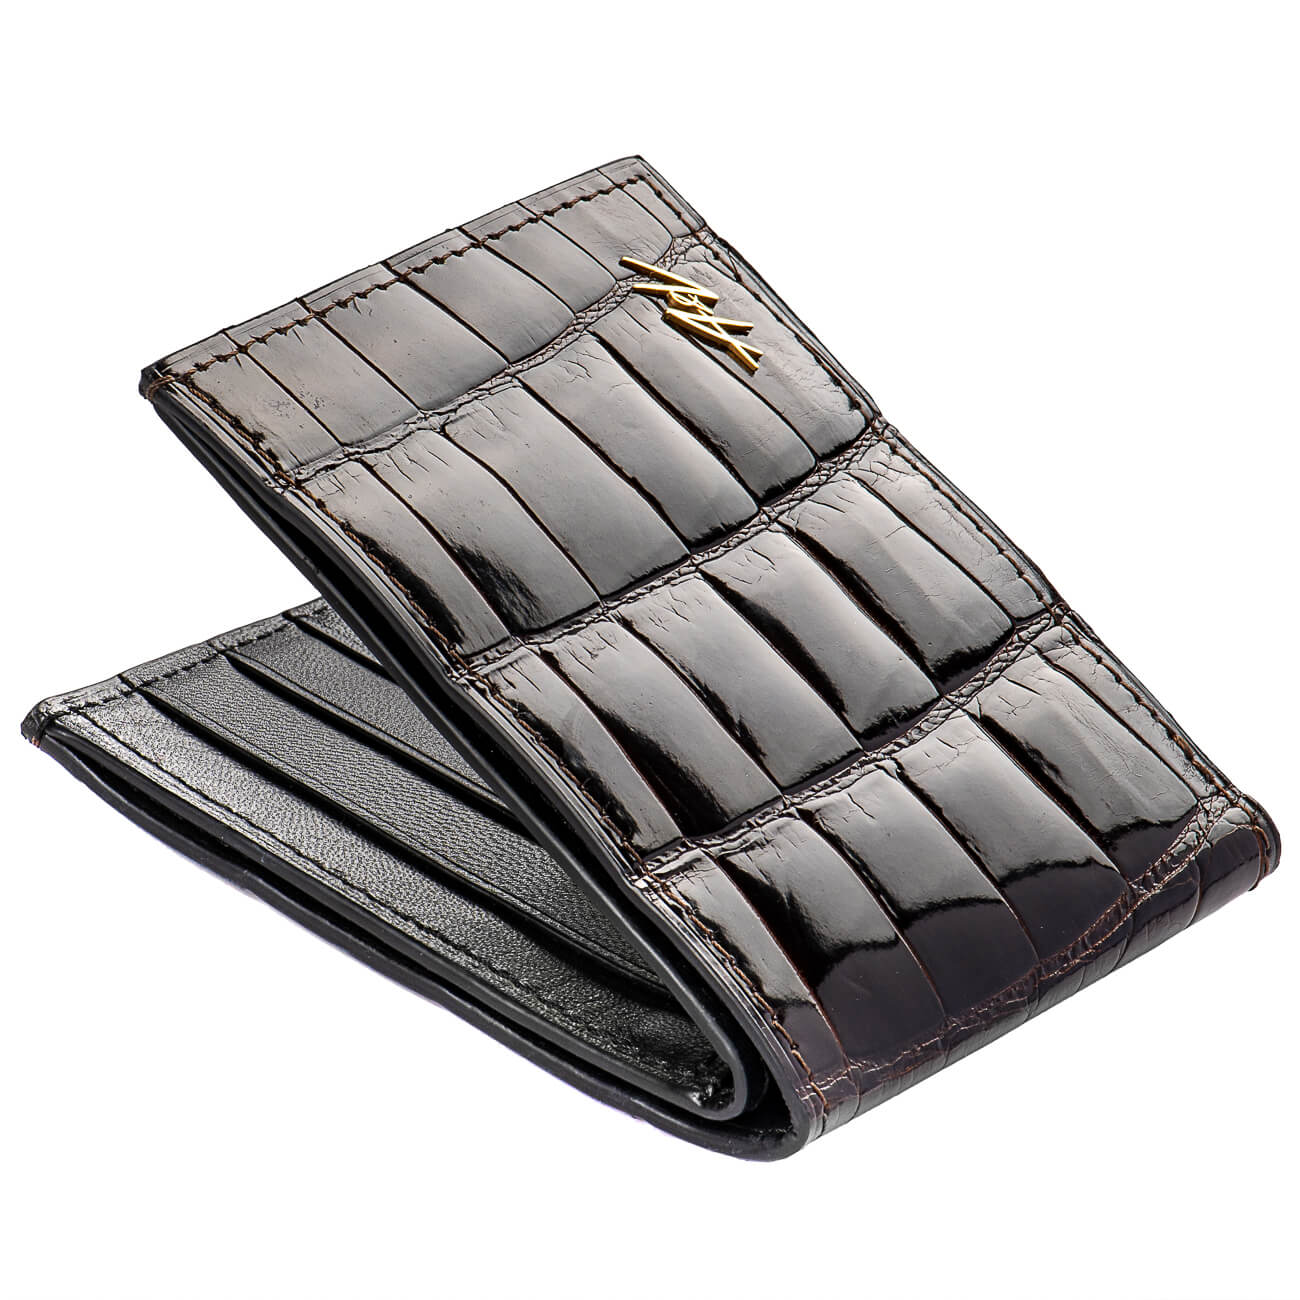 WALLET ALLIGATOR LACQUER CHOCOLATE